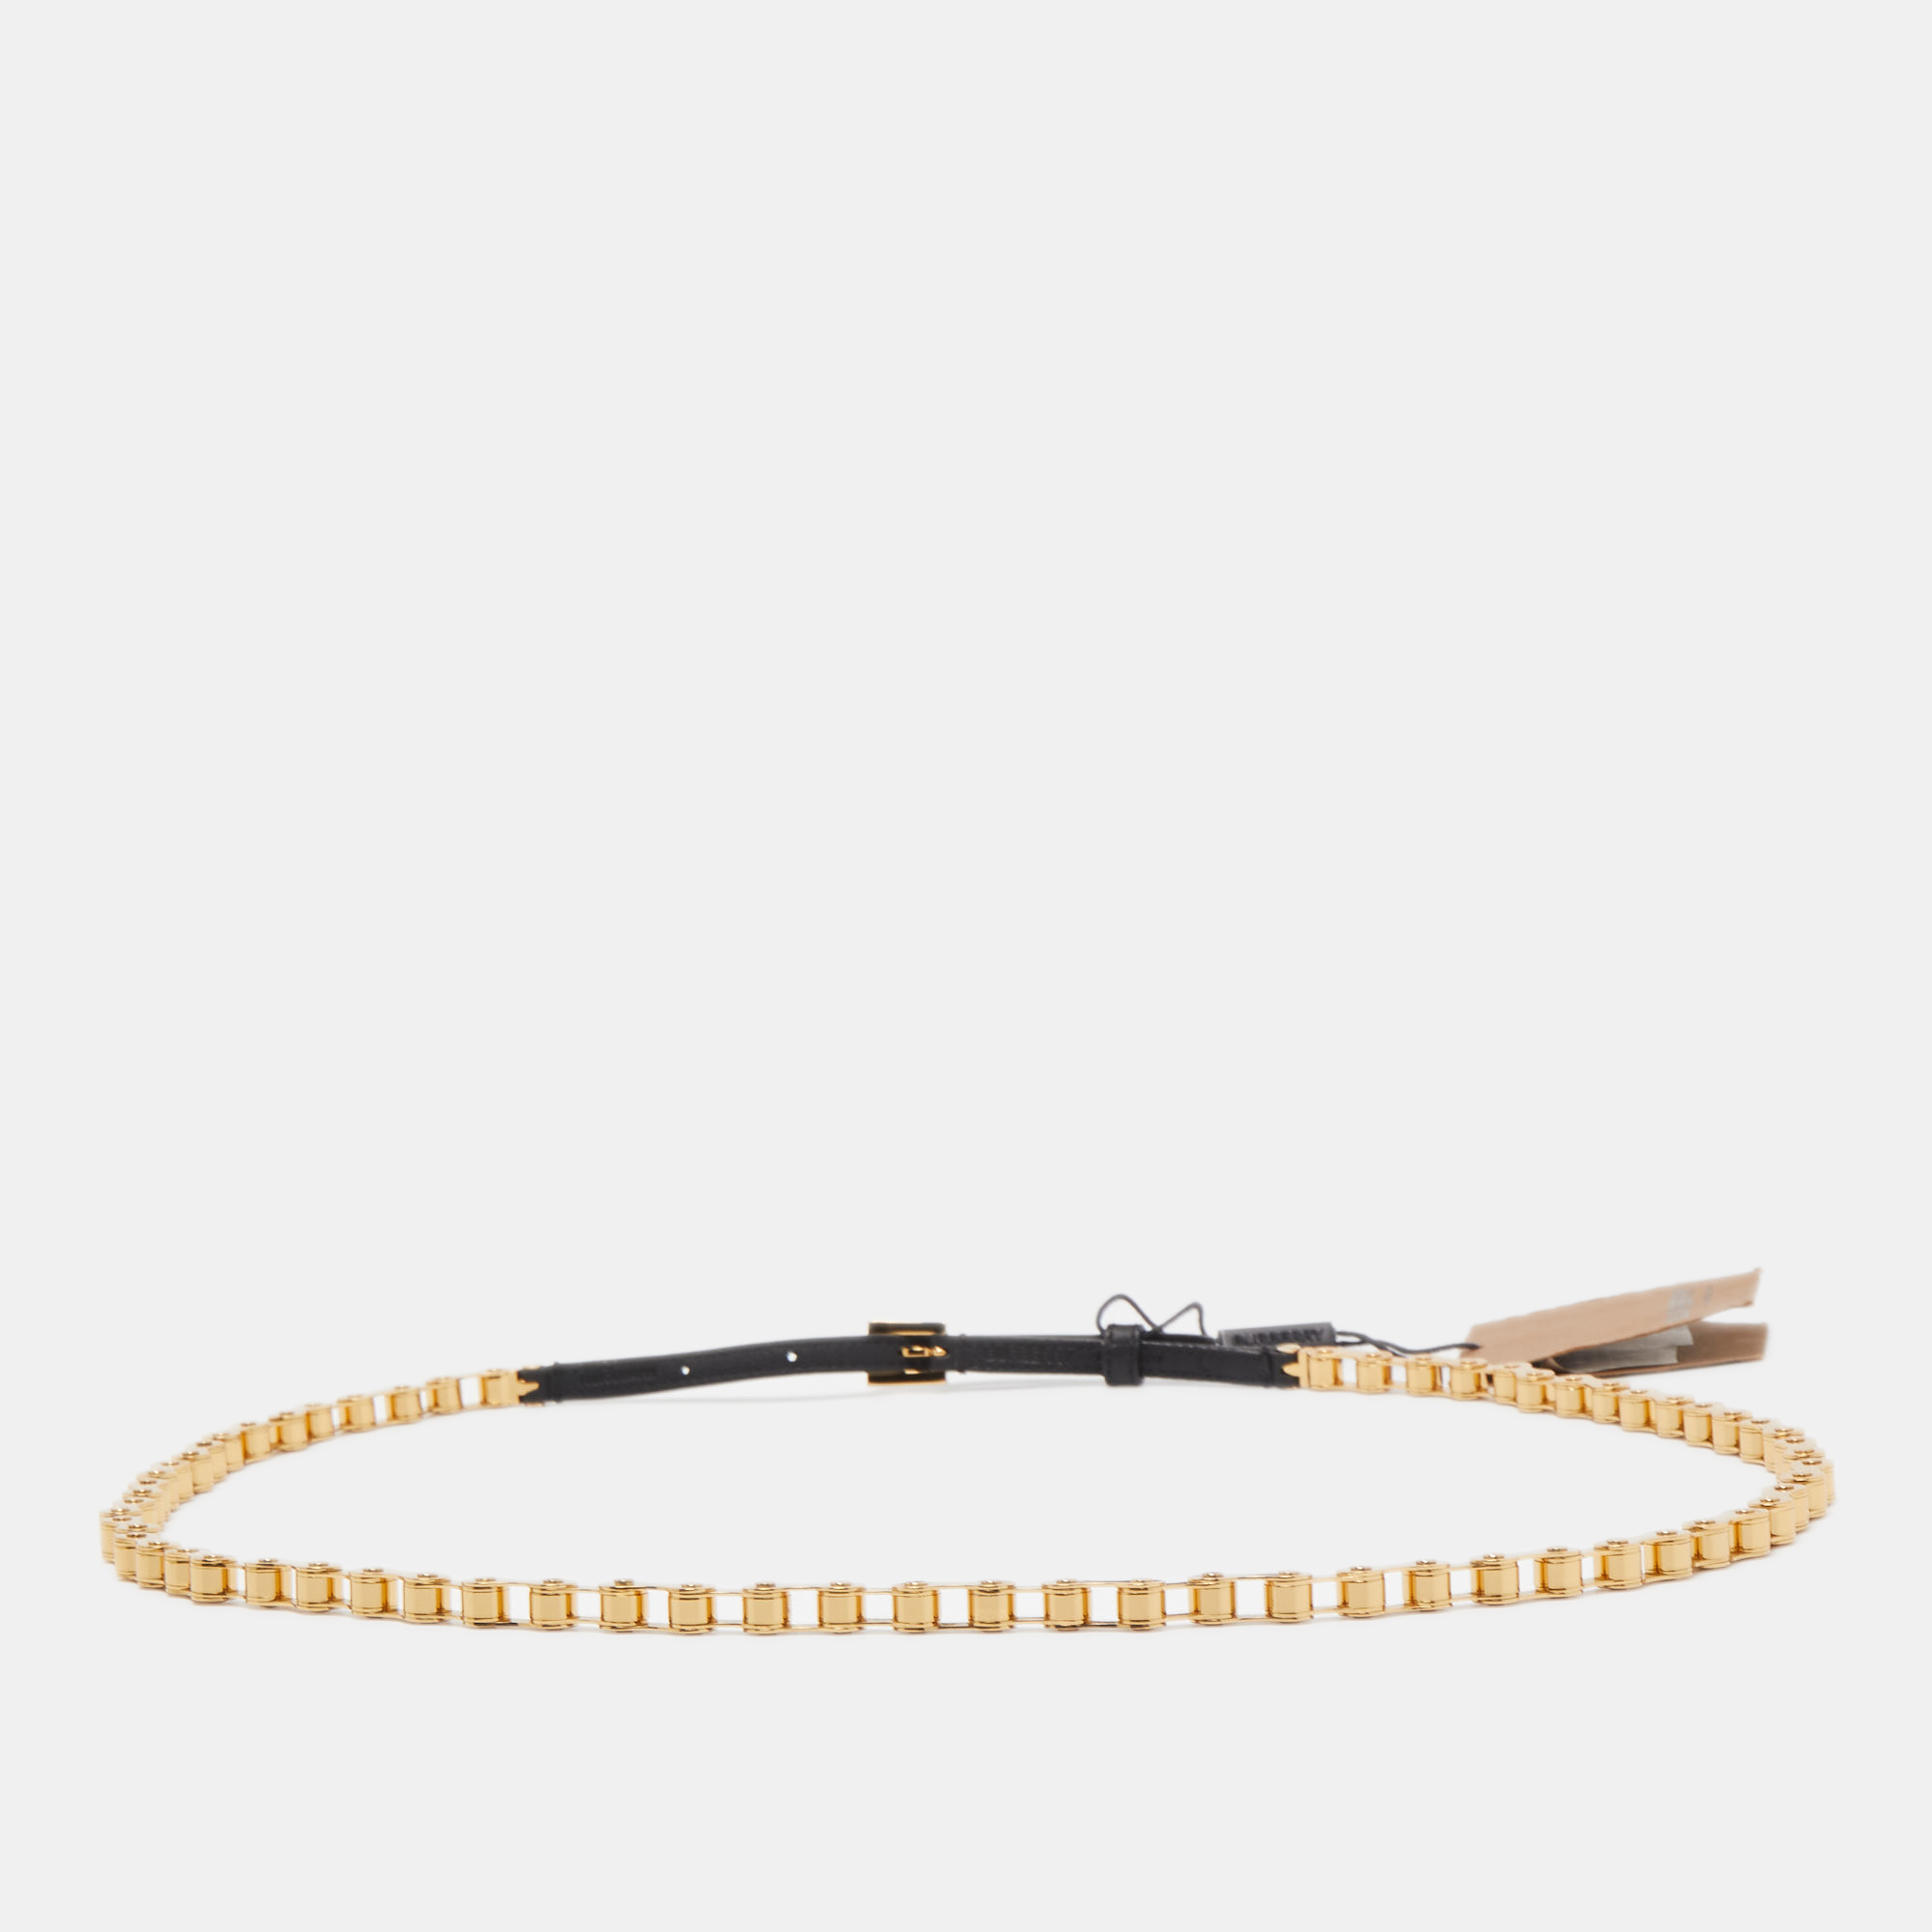 Burberry Black Gold Plated Metal And Leather Bike Chain Belt 95CM